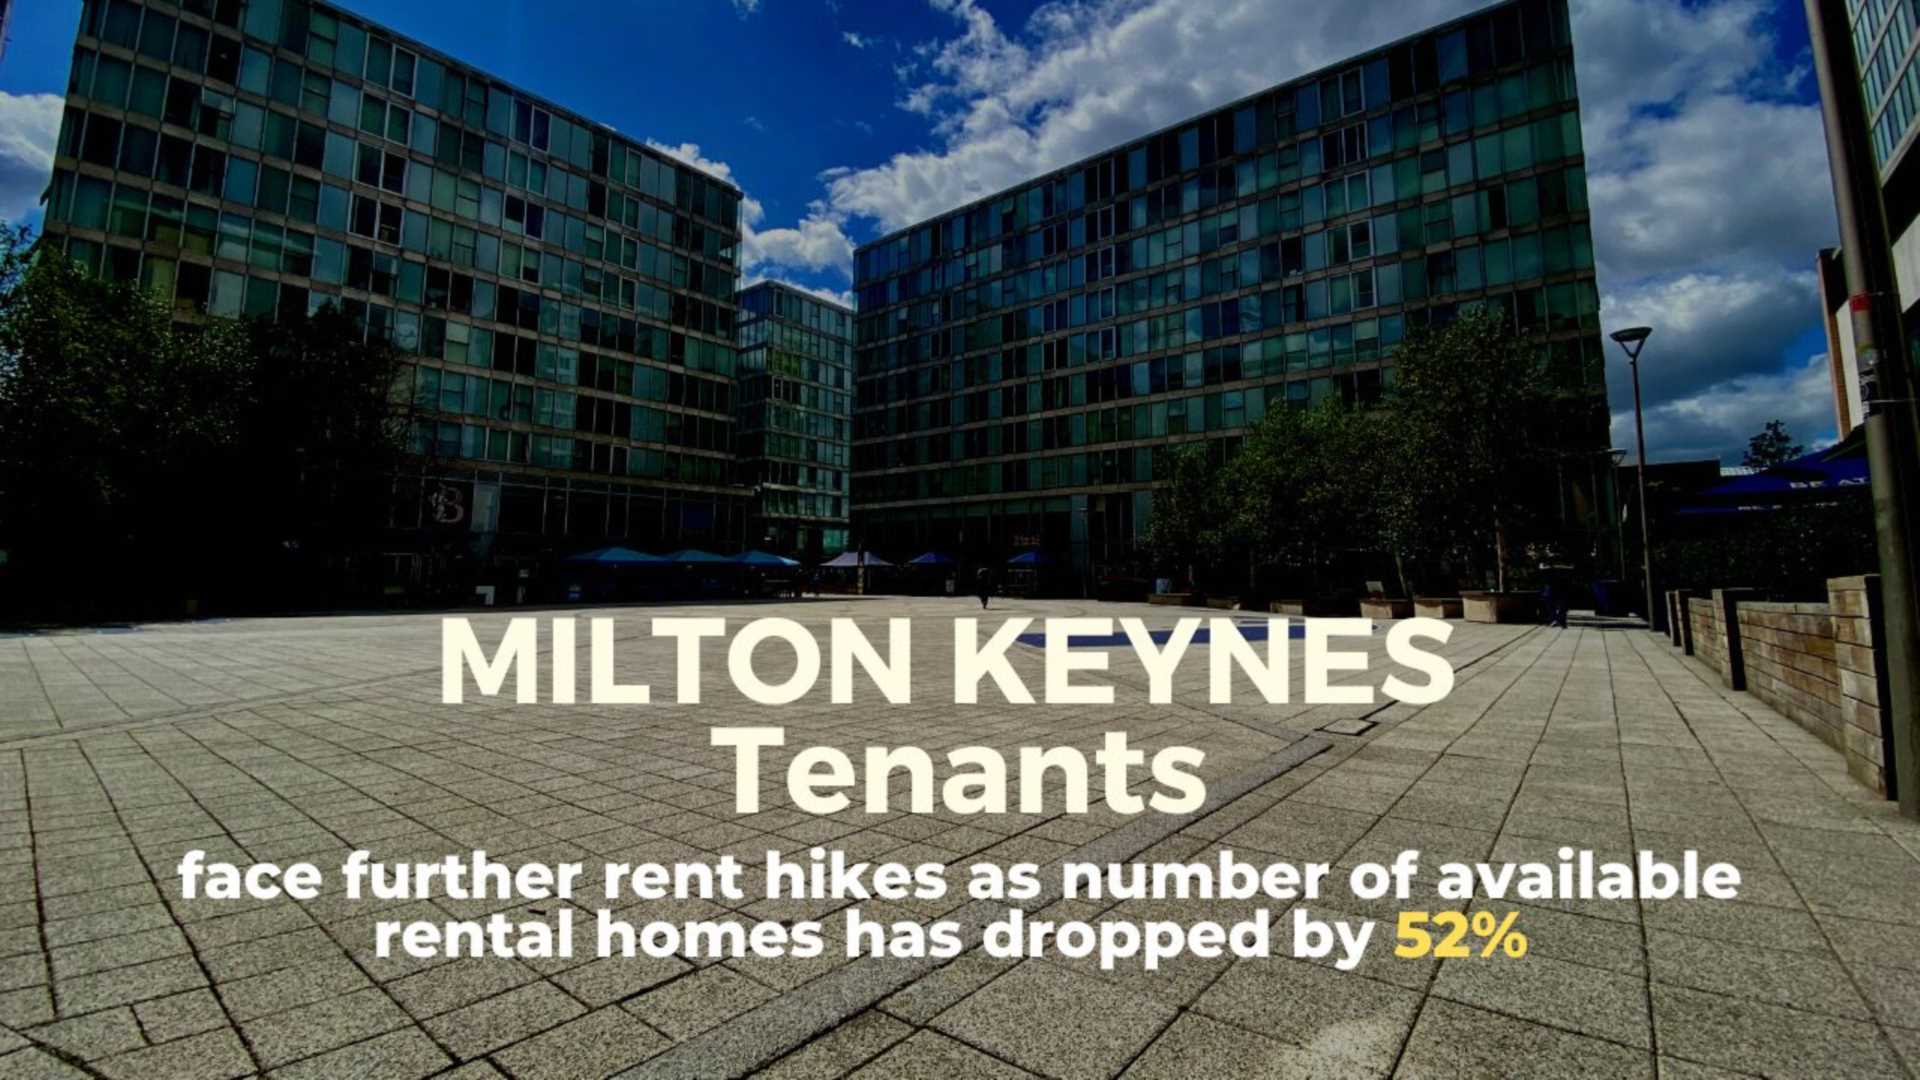 Milton Keynes tenants face further rent hikes, as the number of available rental homes drops by 52%